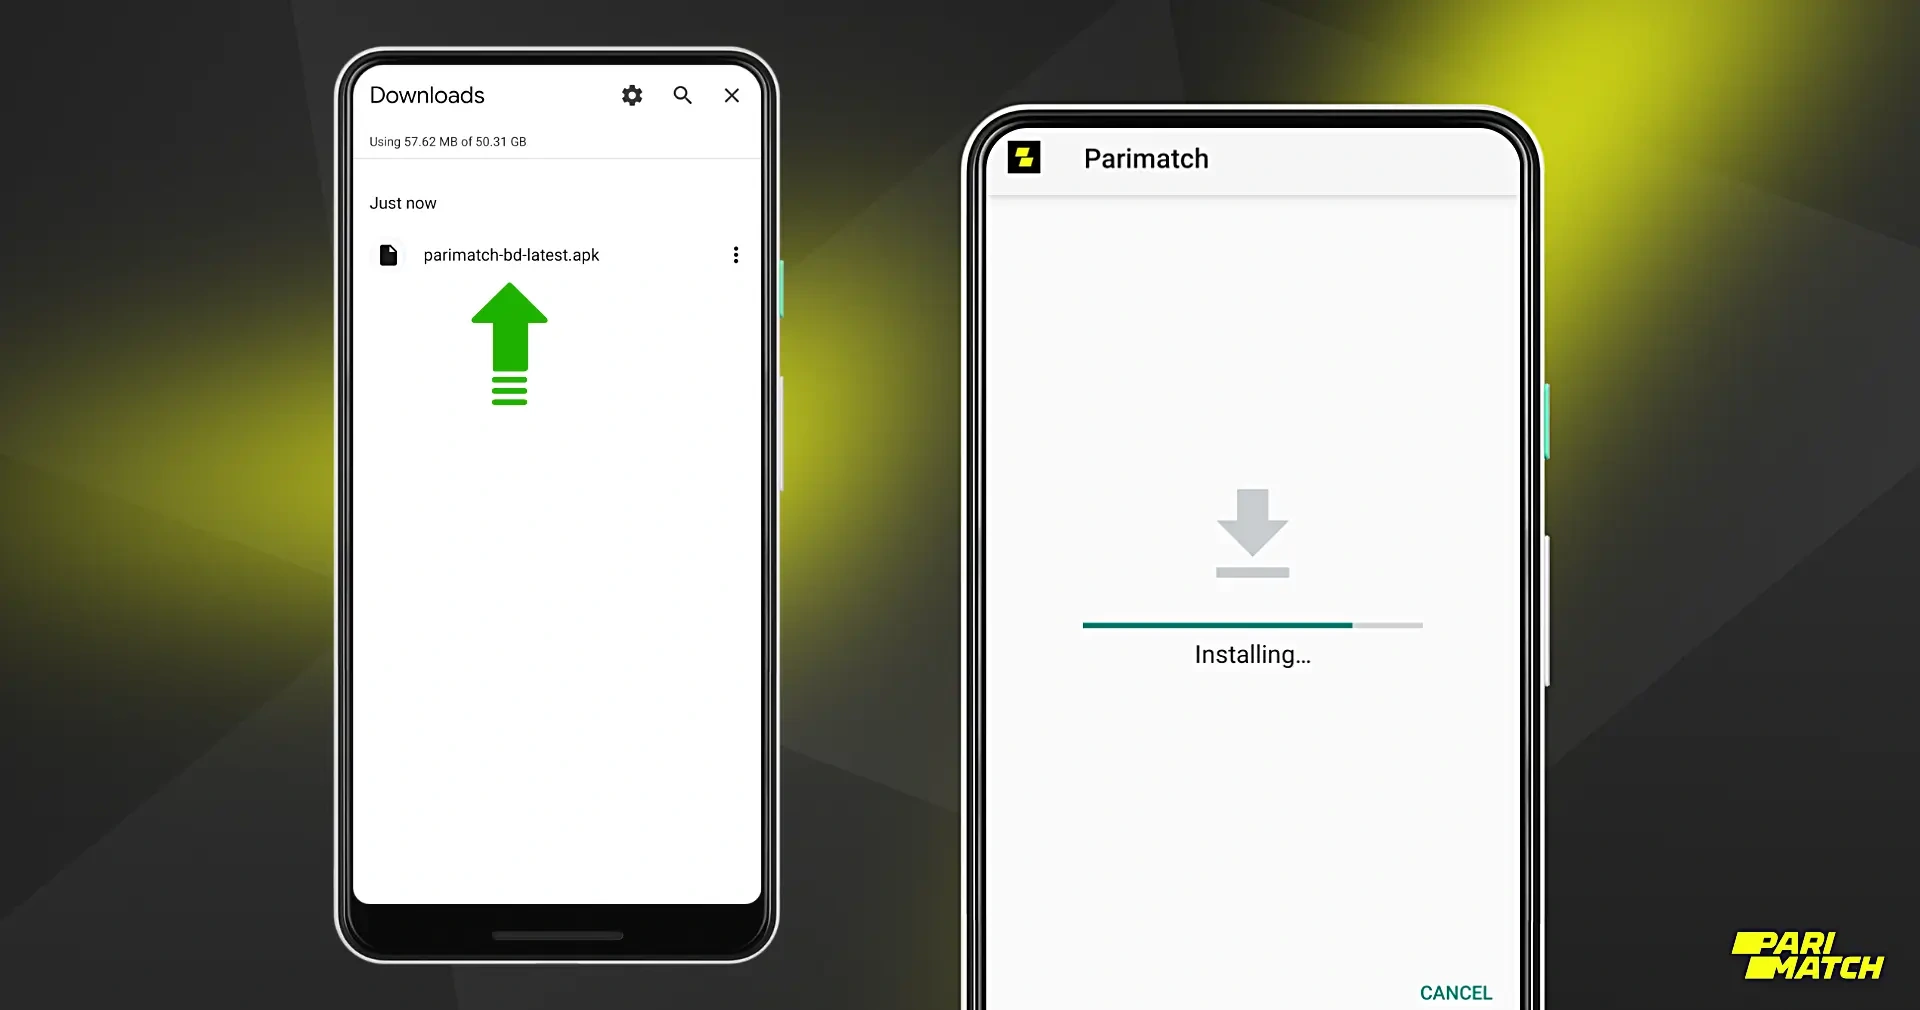 Installing the Parimatch APK application on Android takes several steps